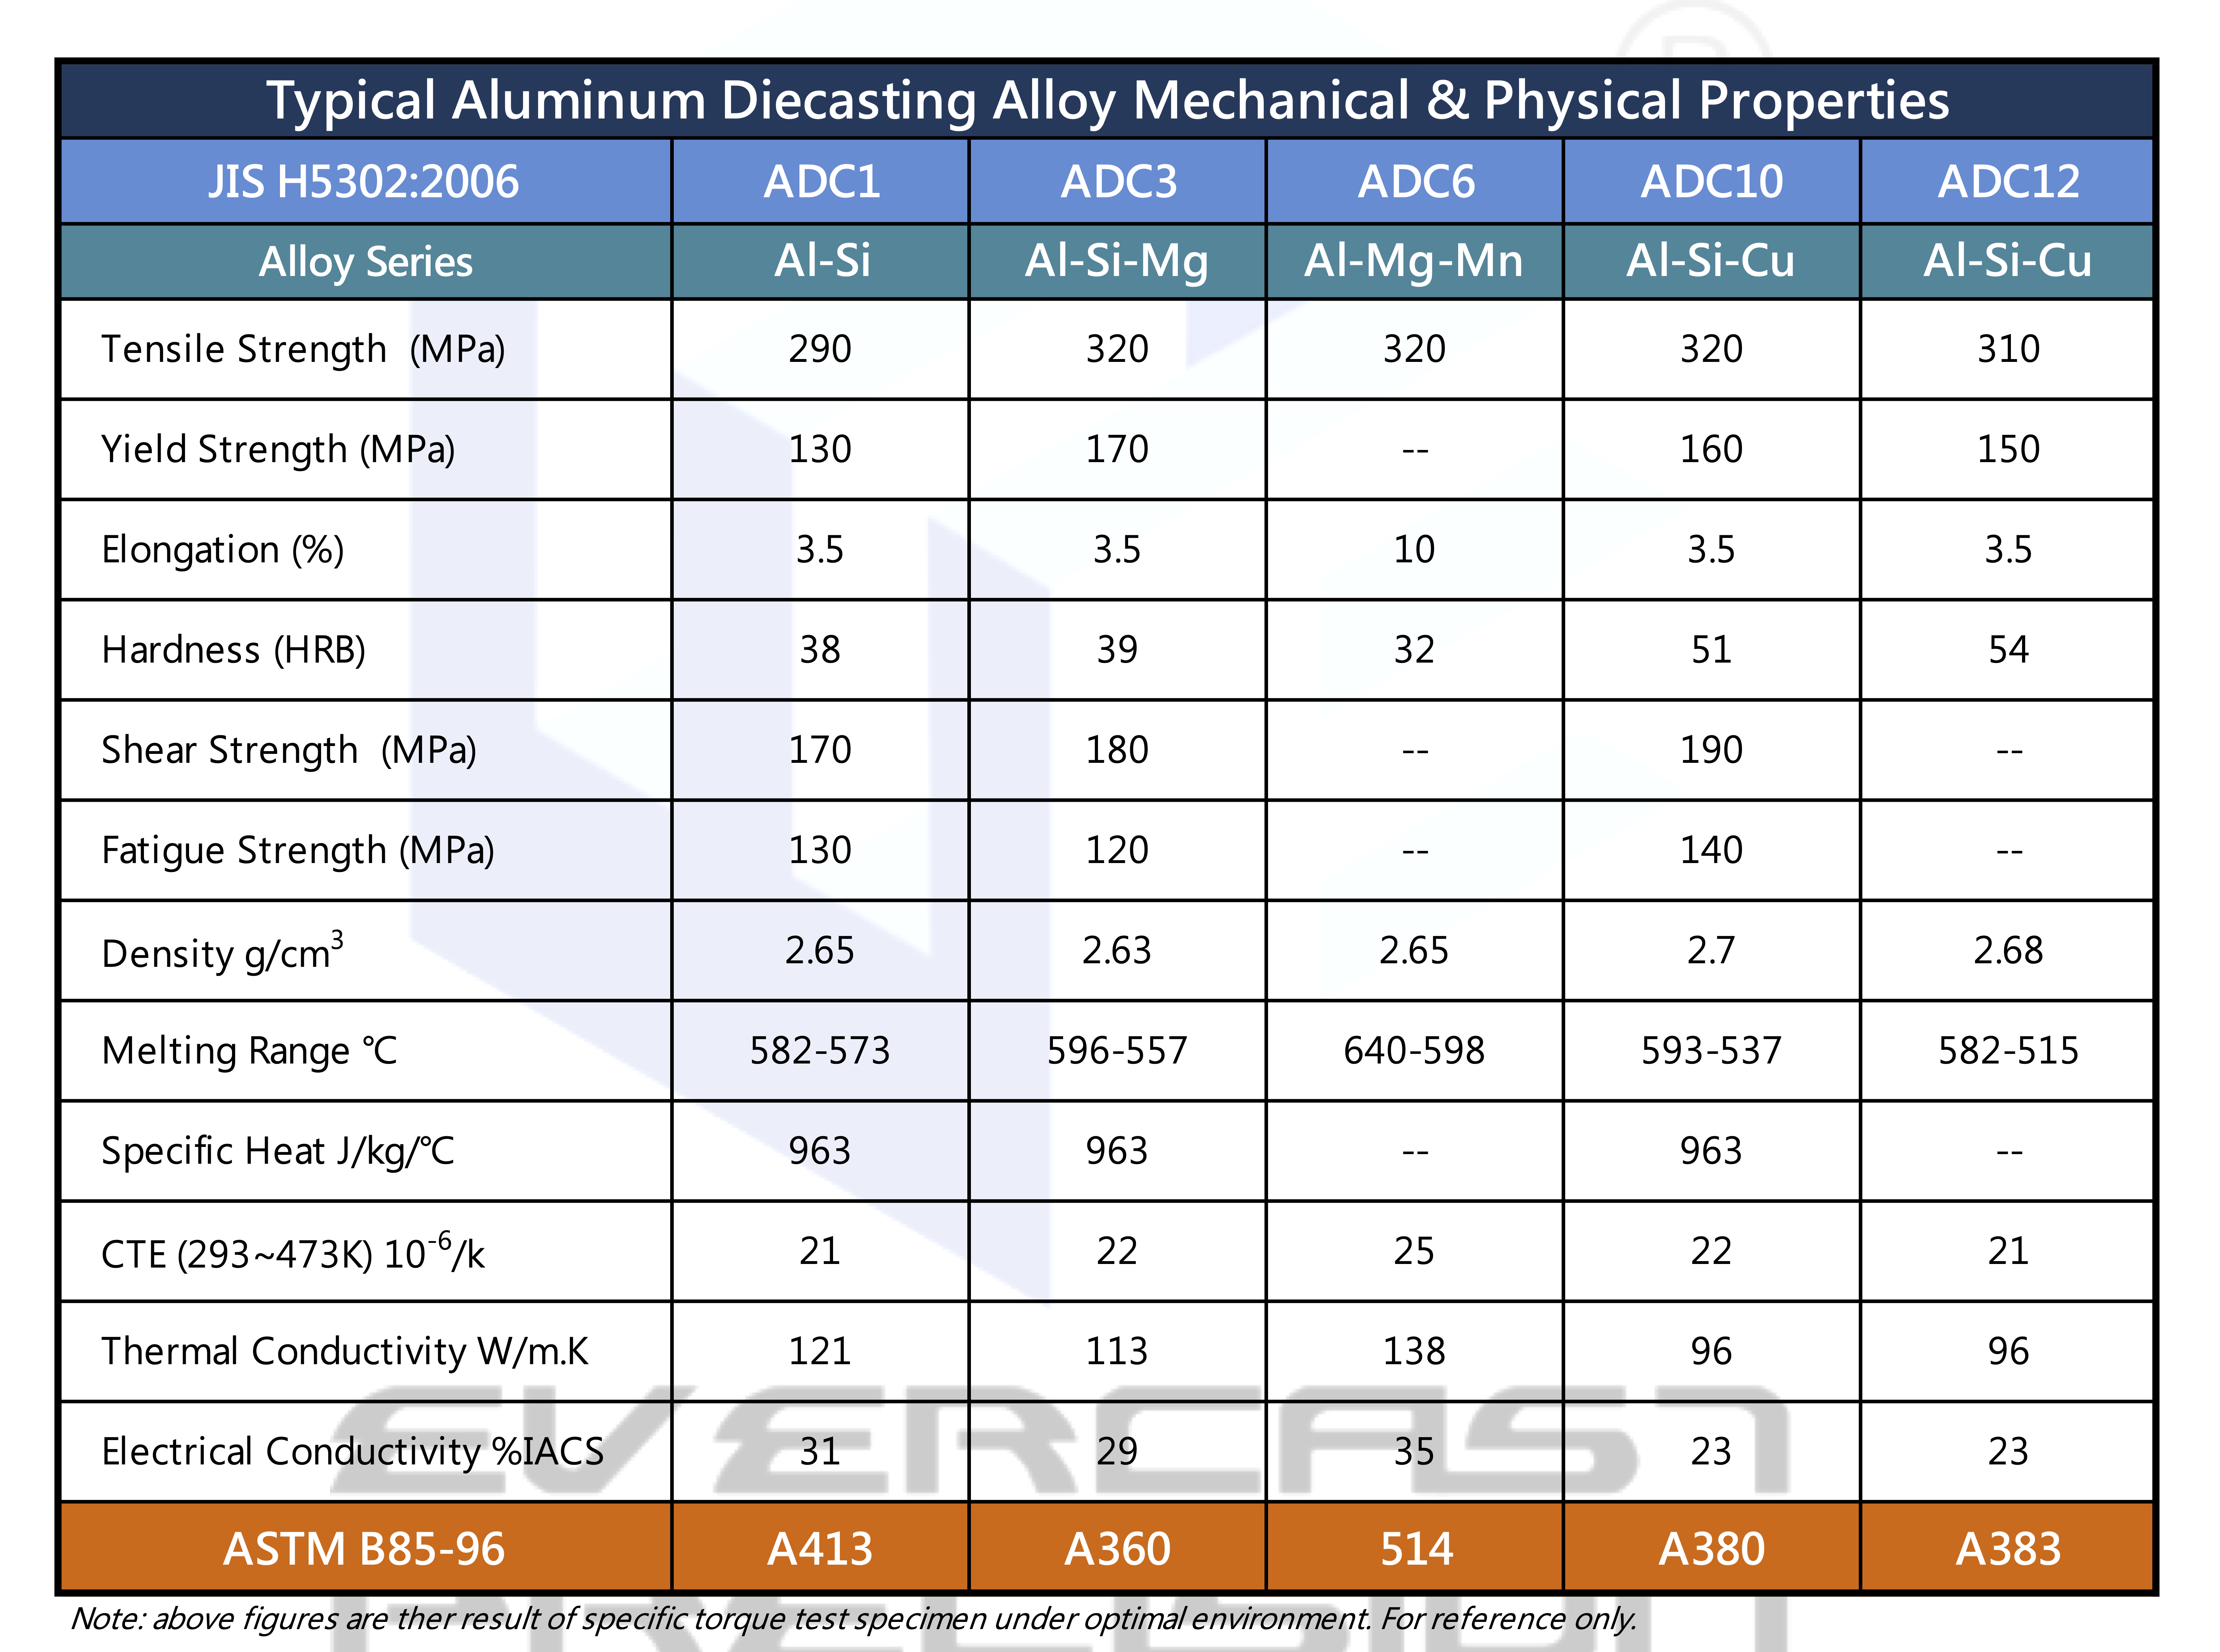 Aluminum Diecasting Alloy Mechanical & Physical Properties